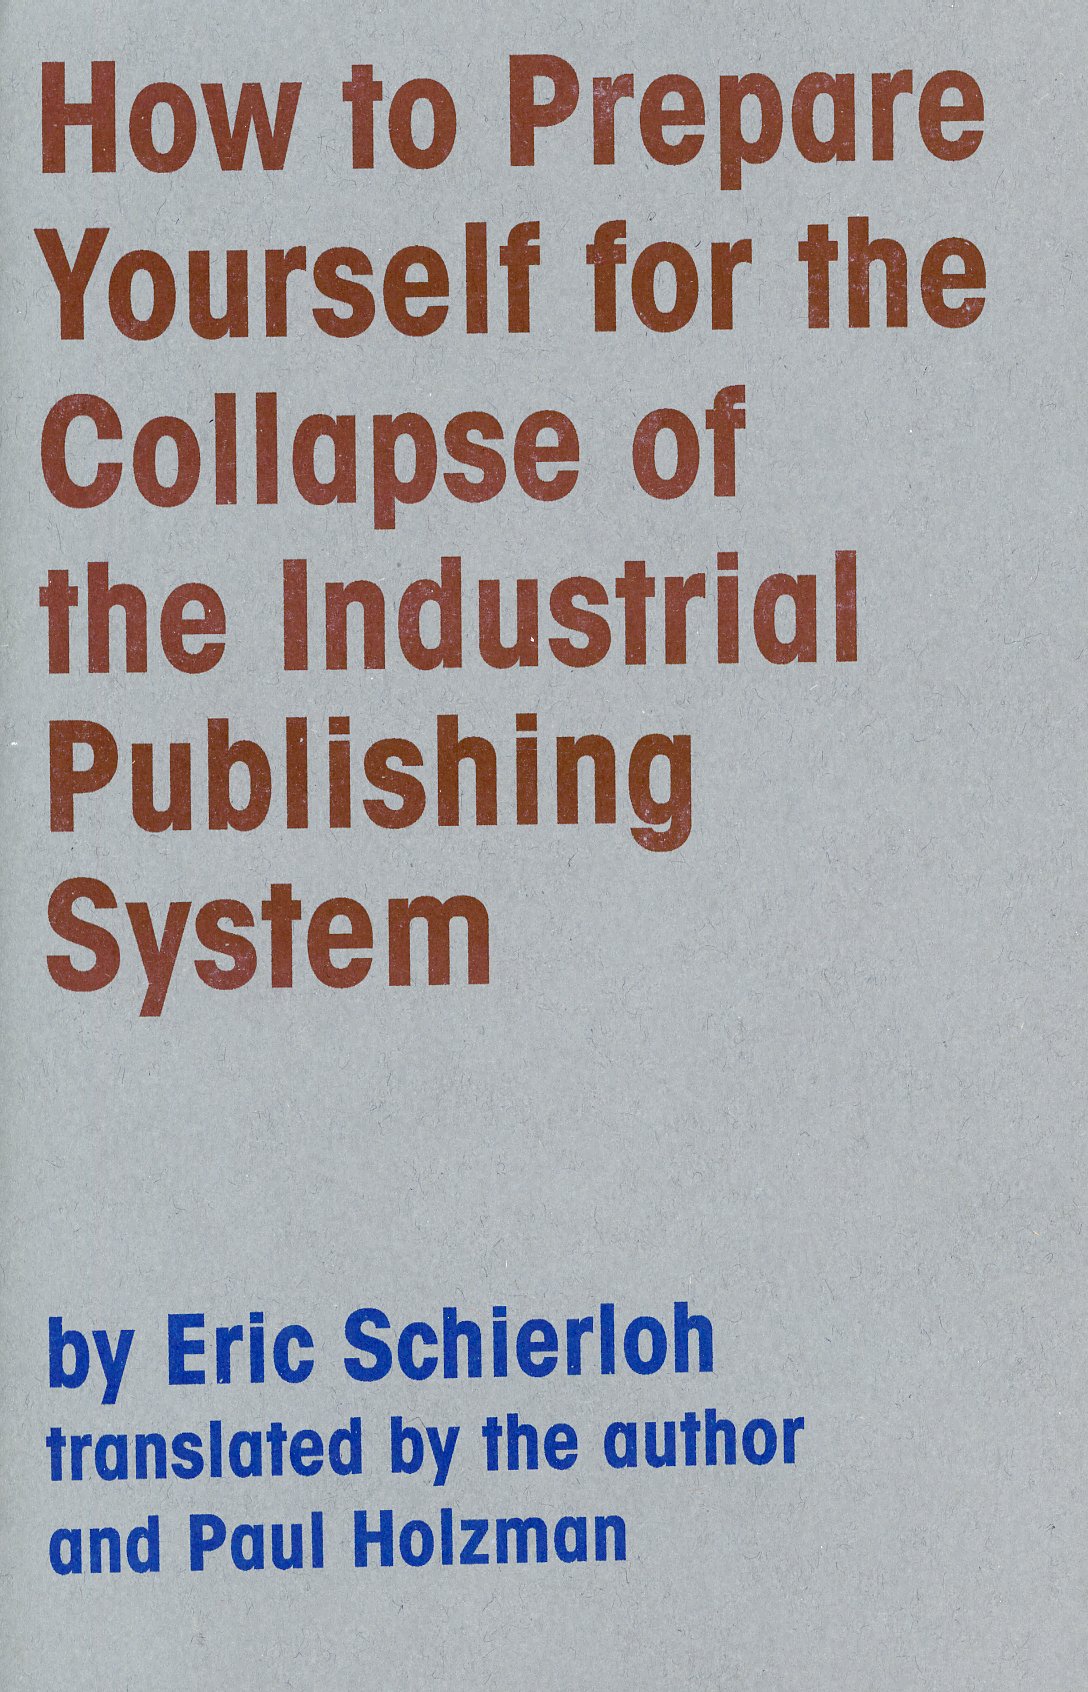 How to Prepare Yourself for the Collapse of the Industrial Publishing System| Eric Schierloh